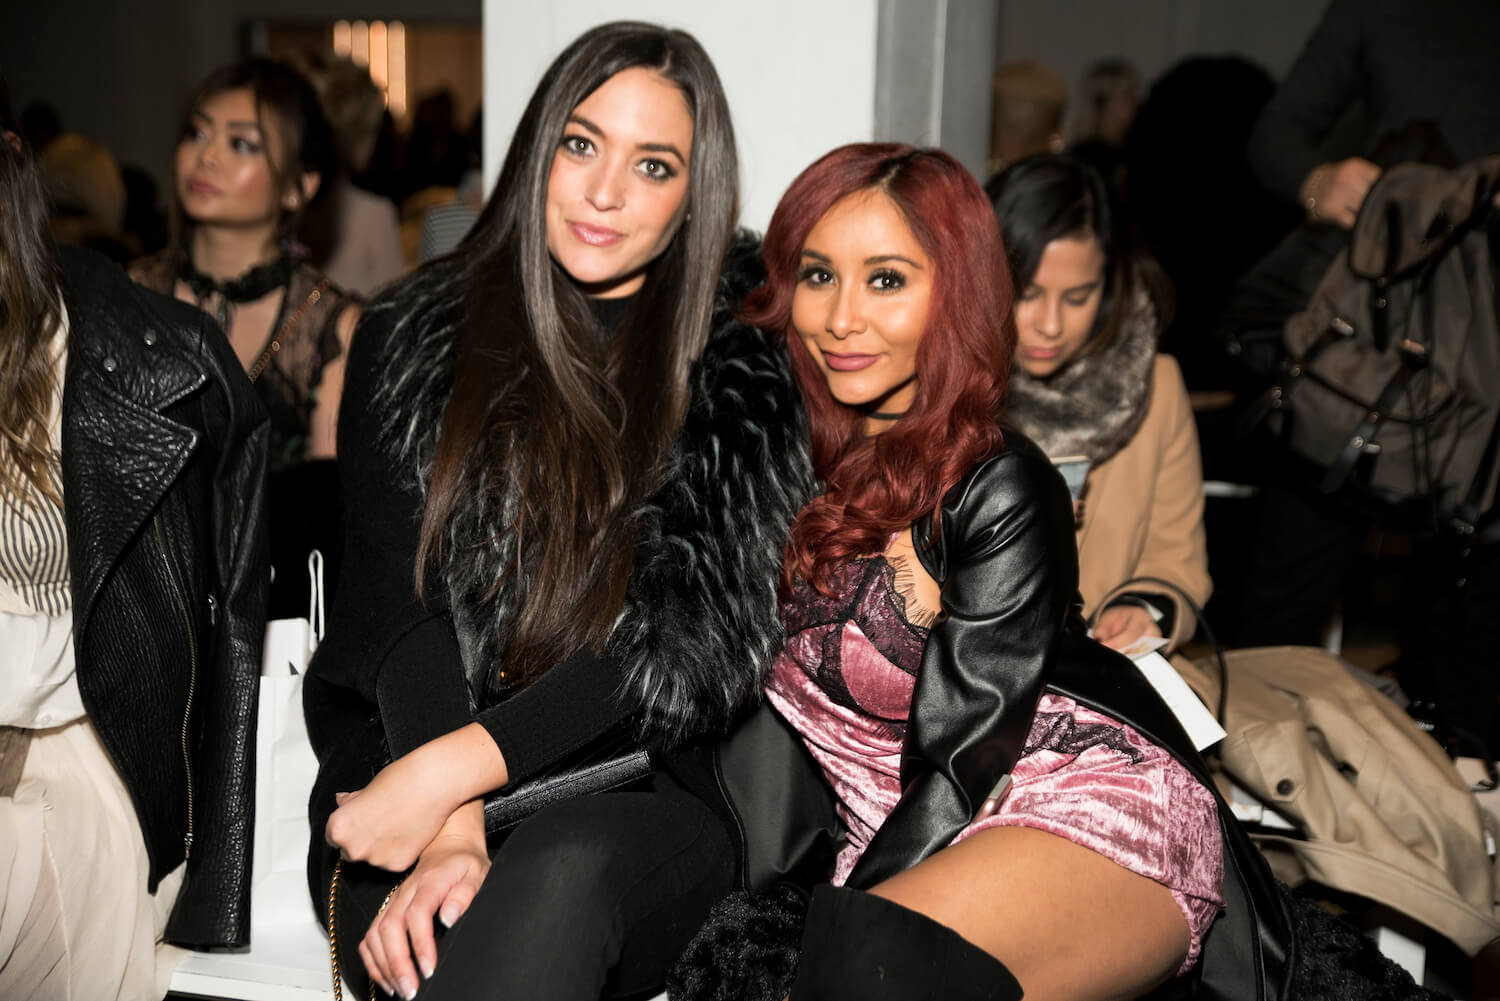 'Jersey Shore: Family Vacation' Season 7 stars Sammi Giancola and Nicole "Snooki" Polizzi sitting next to each other at New York Fashion Week in 2017